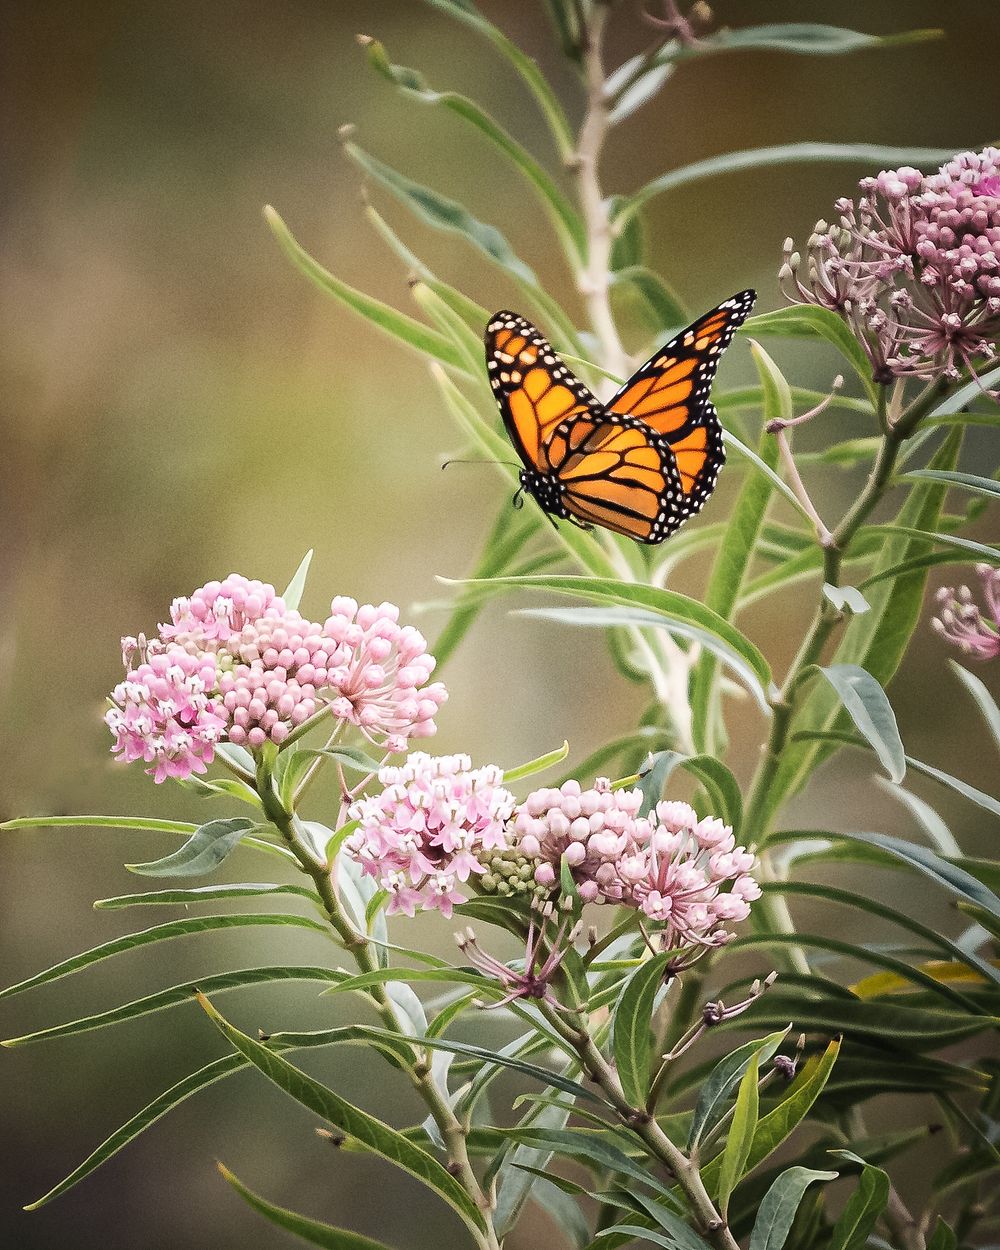 Free monarch butterfly image, public domain animal CC0 photo.